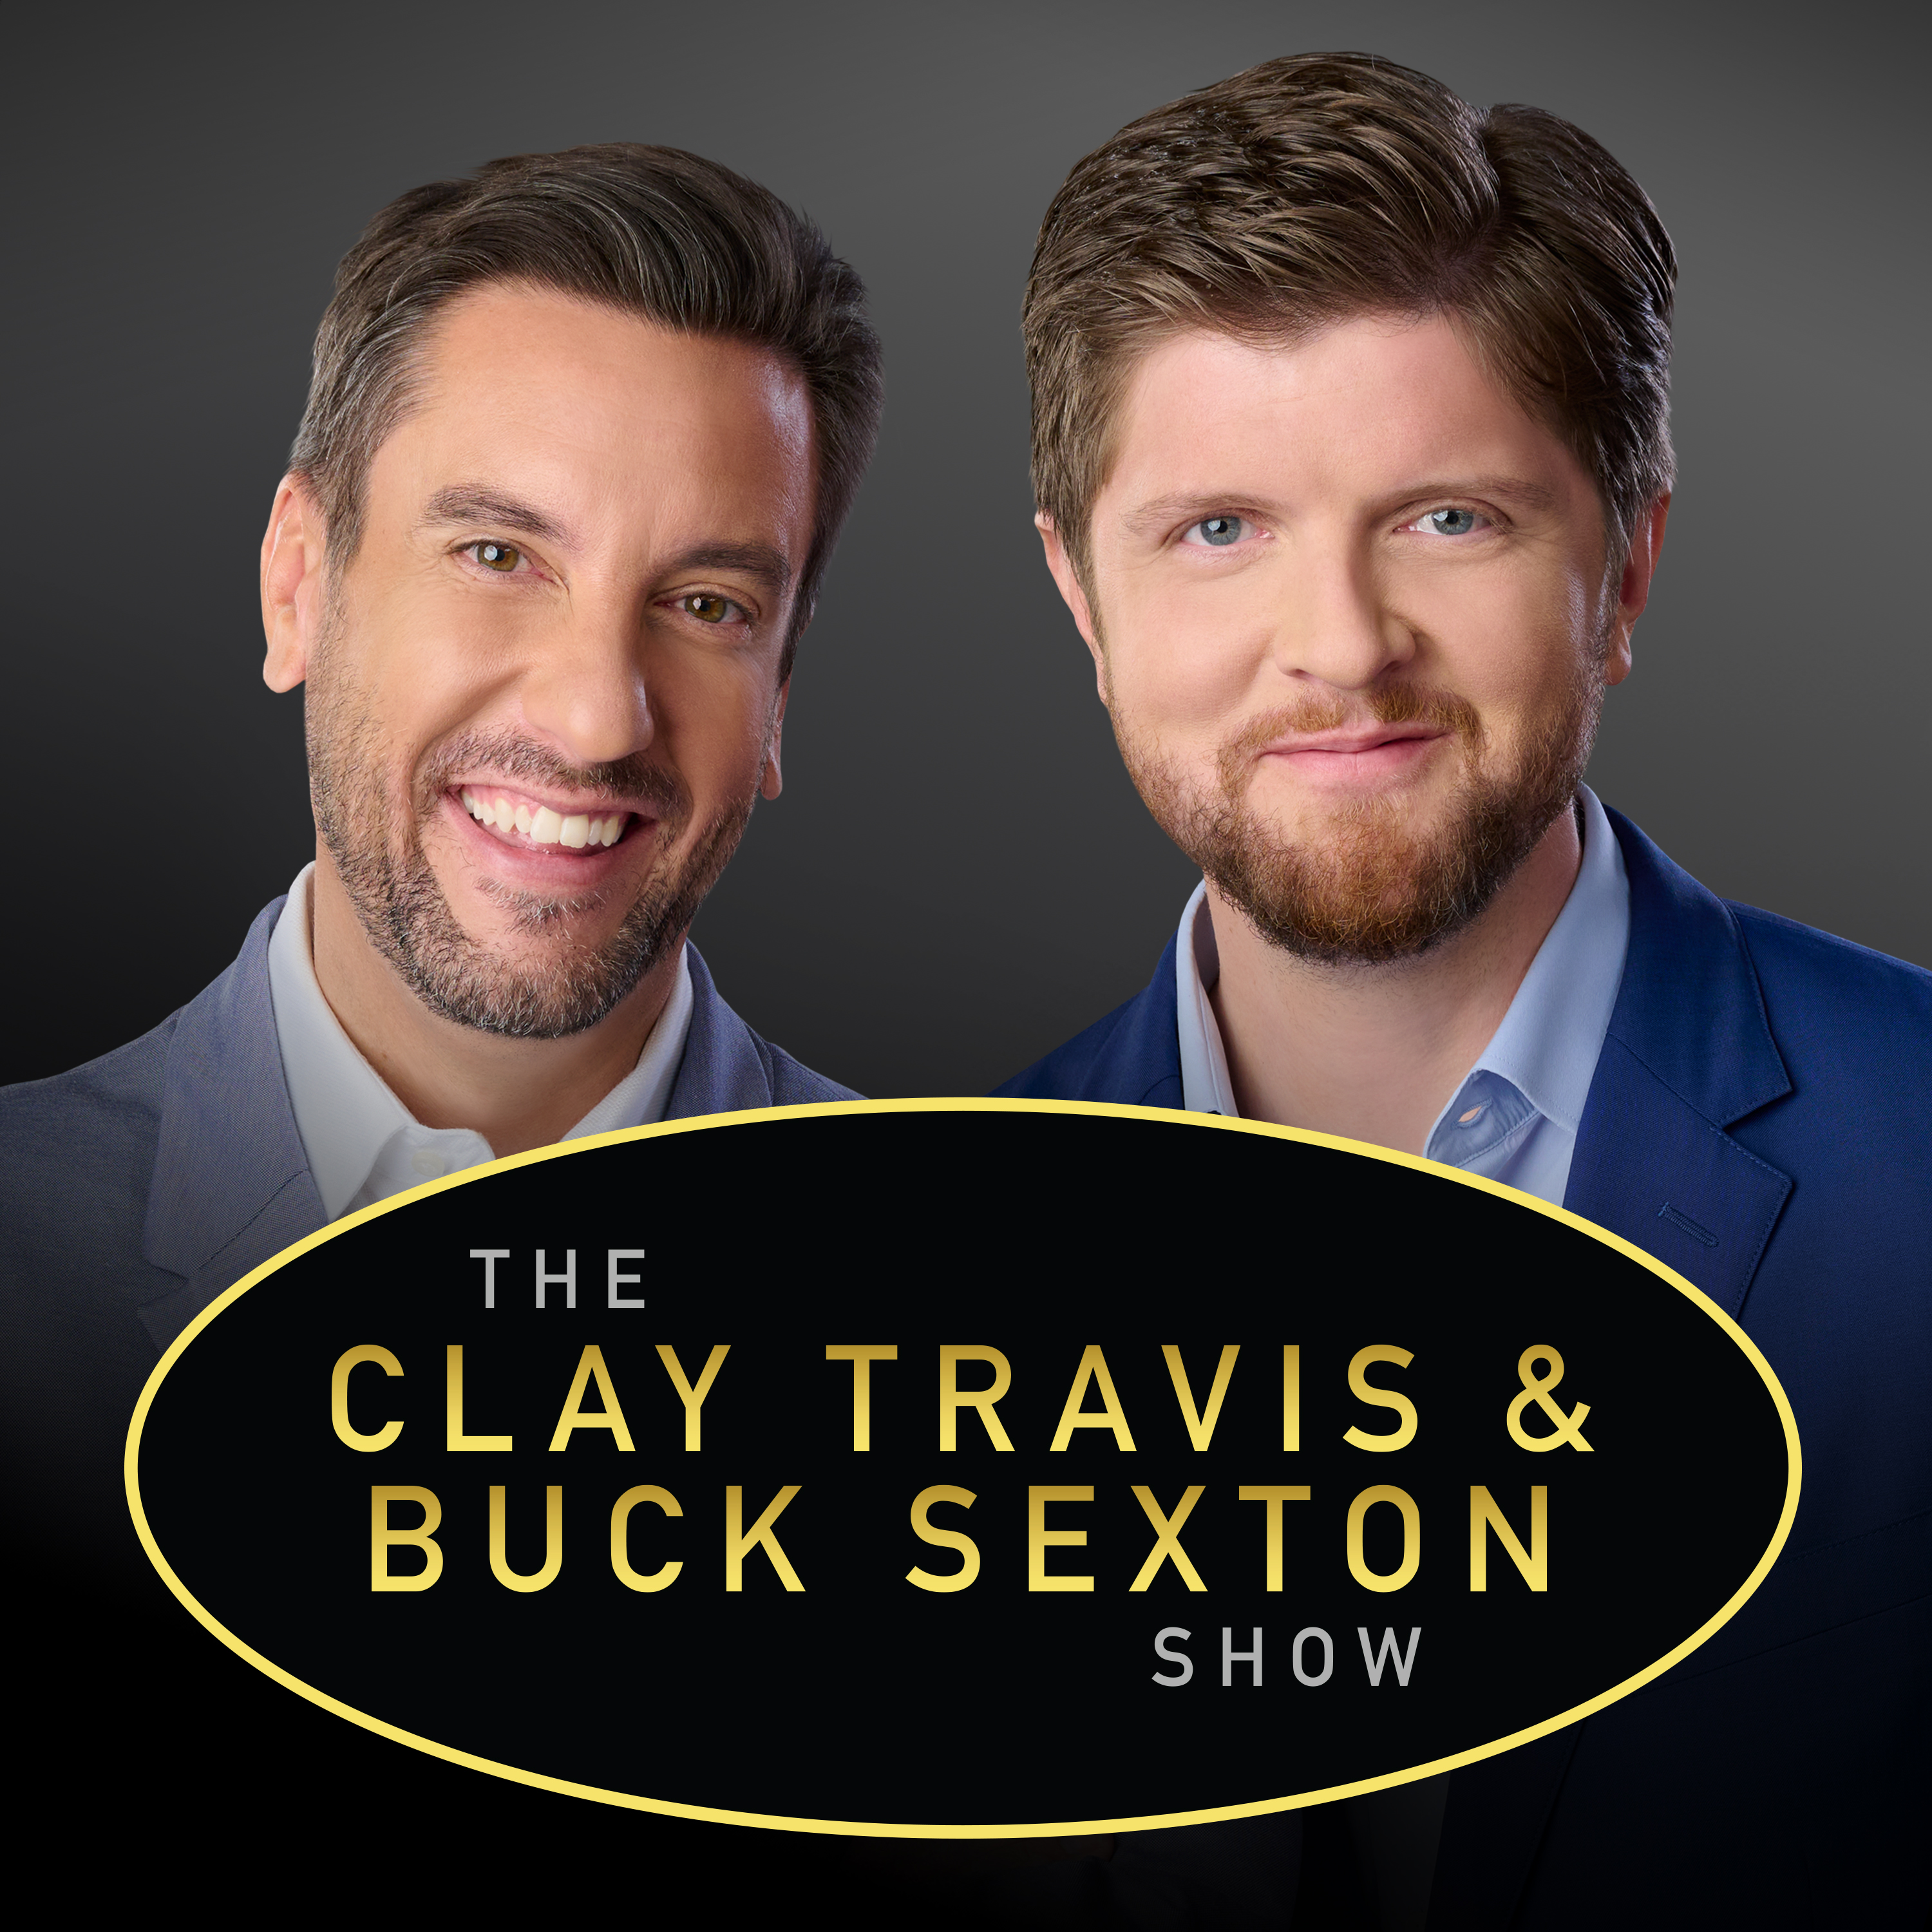 Clay Travis and Buck Sexton Show H2 – Apr 12 2022